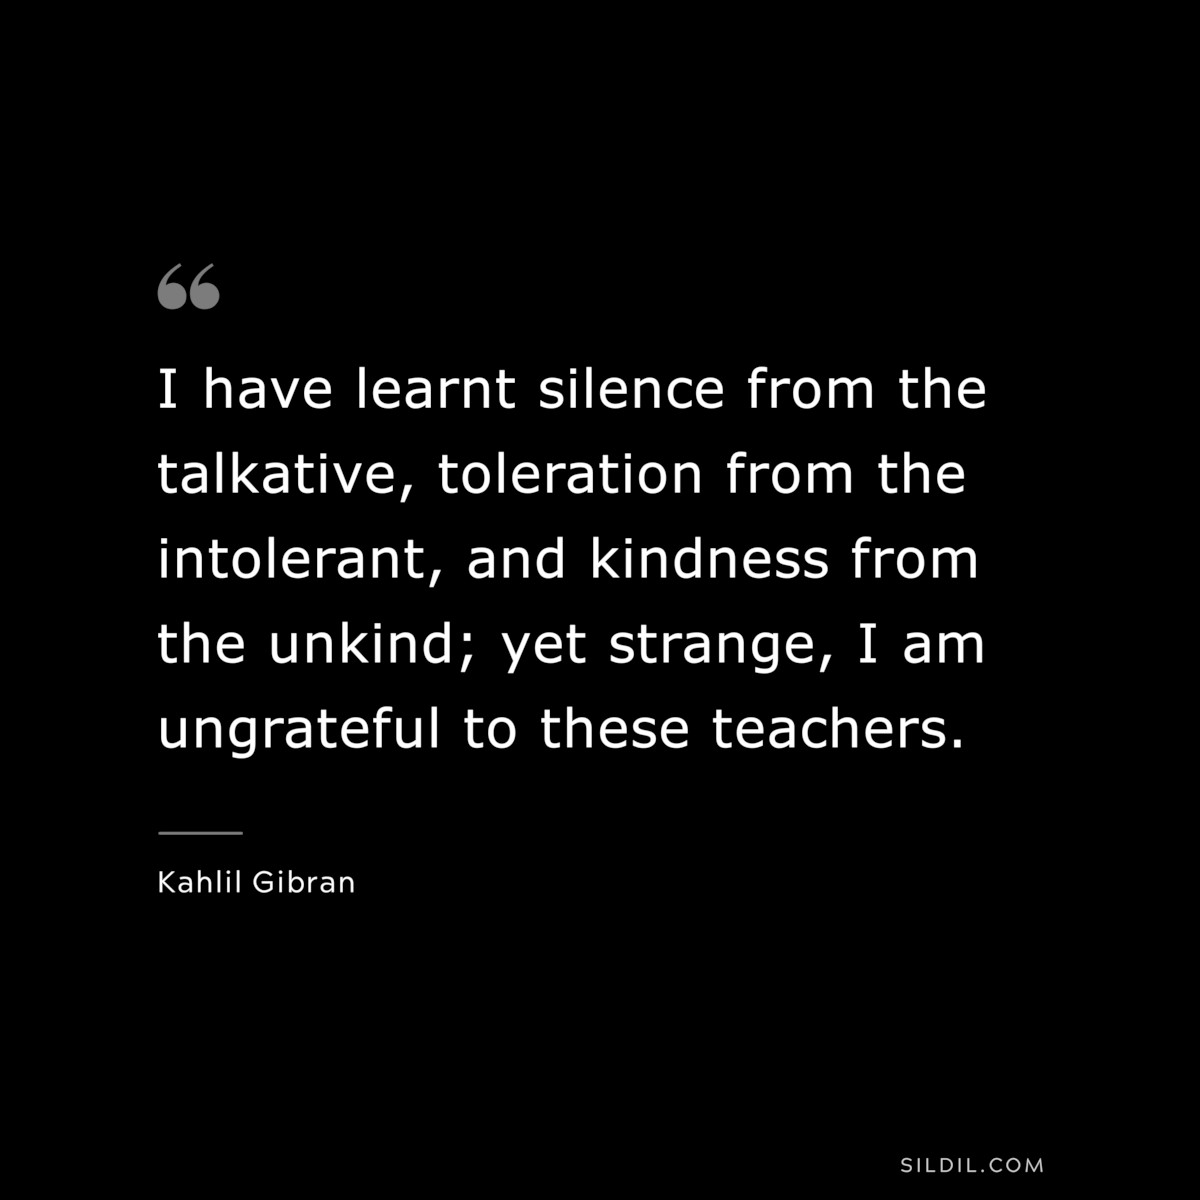 I have learnt silence from the talkative, toleration from the intolerant, and kindness from the unkind; yet strange, I am ungrateful to these teachers. ― Kahlil Gibran